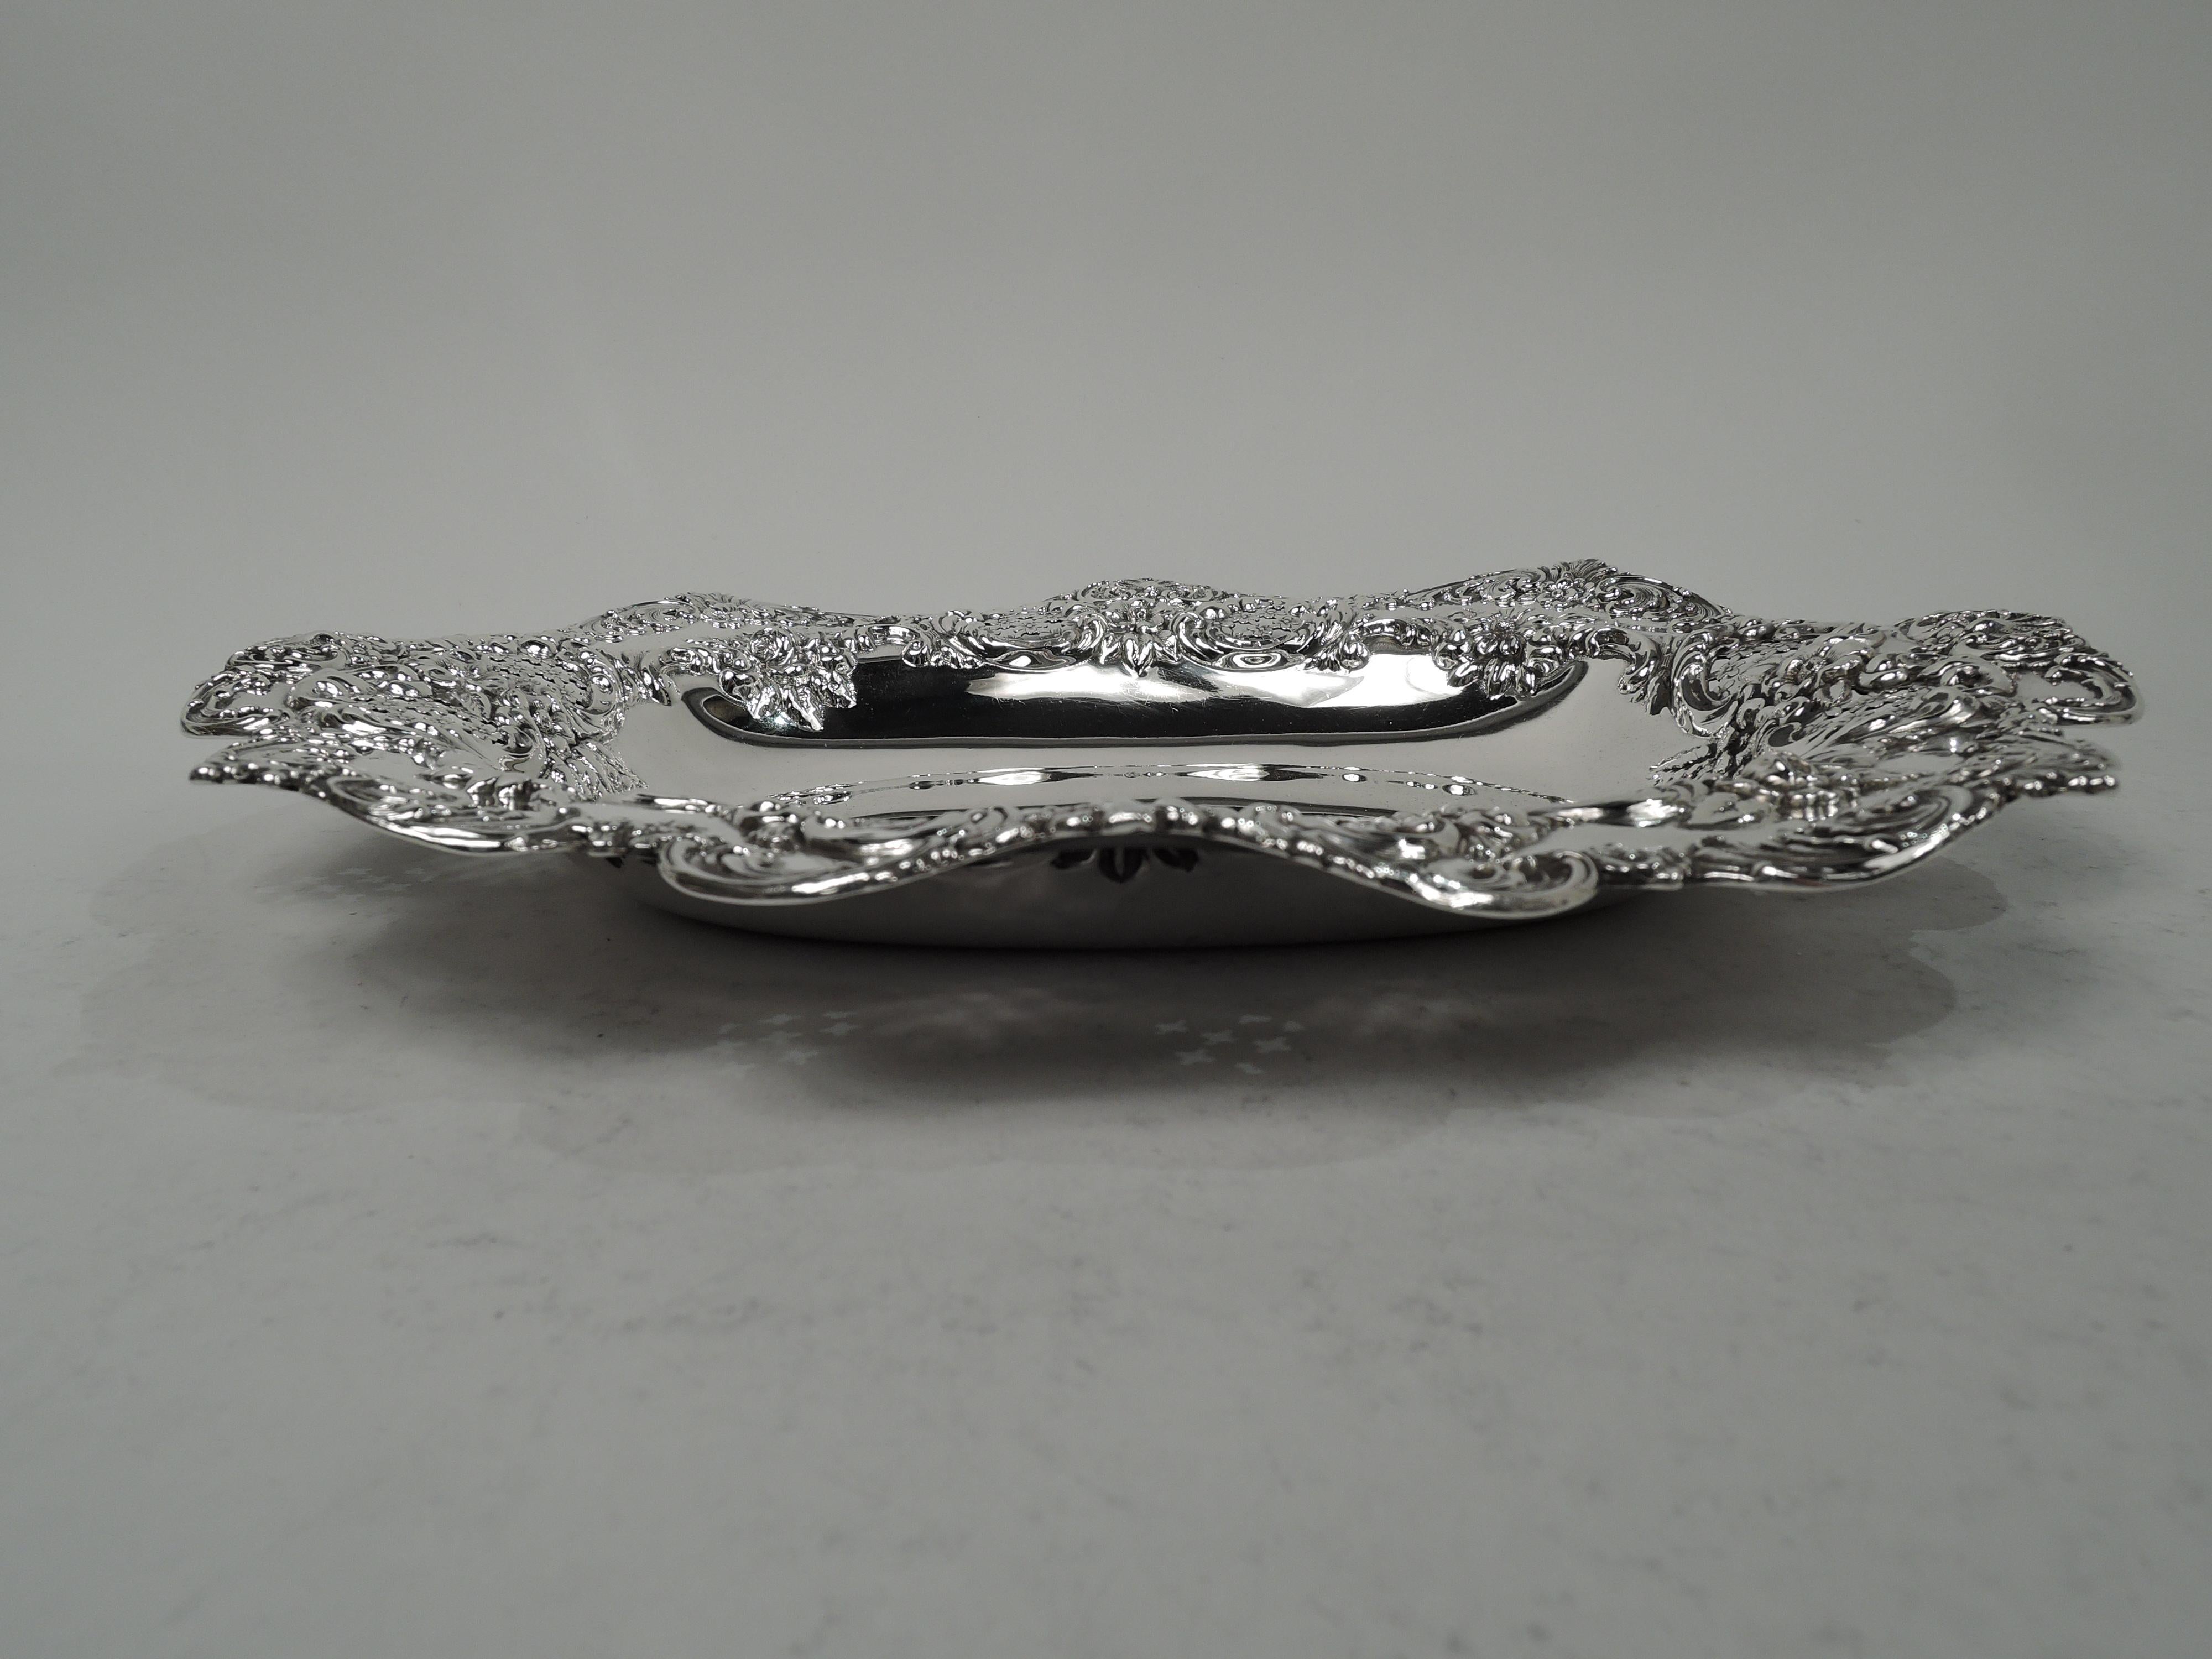 Edwardian Classical sterling silver bowl. Made by Tiffany & Co. in New York. Oval well with tapering sides and wavy, scrolled rim. Chased and cast scrolls, flowers, leaves, and scallop shells. Fully marked including maker’s stamp, pattern no. 14367,